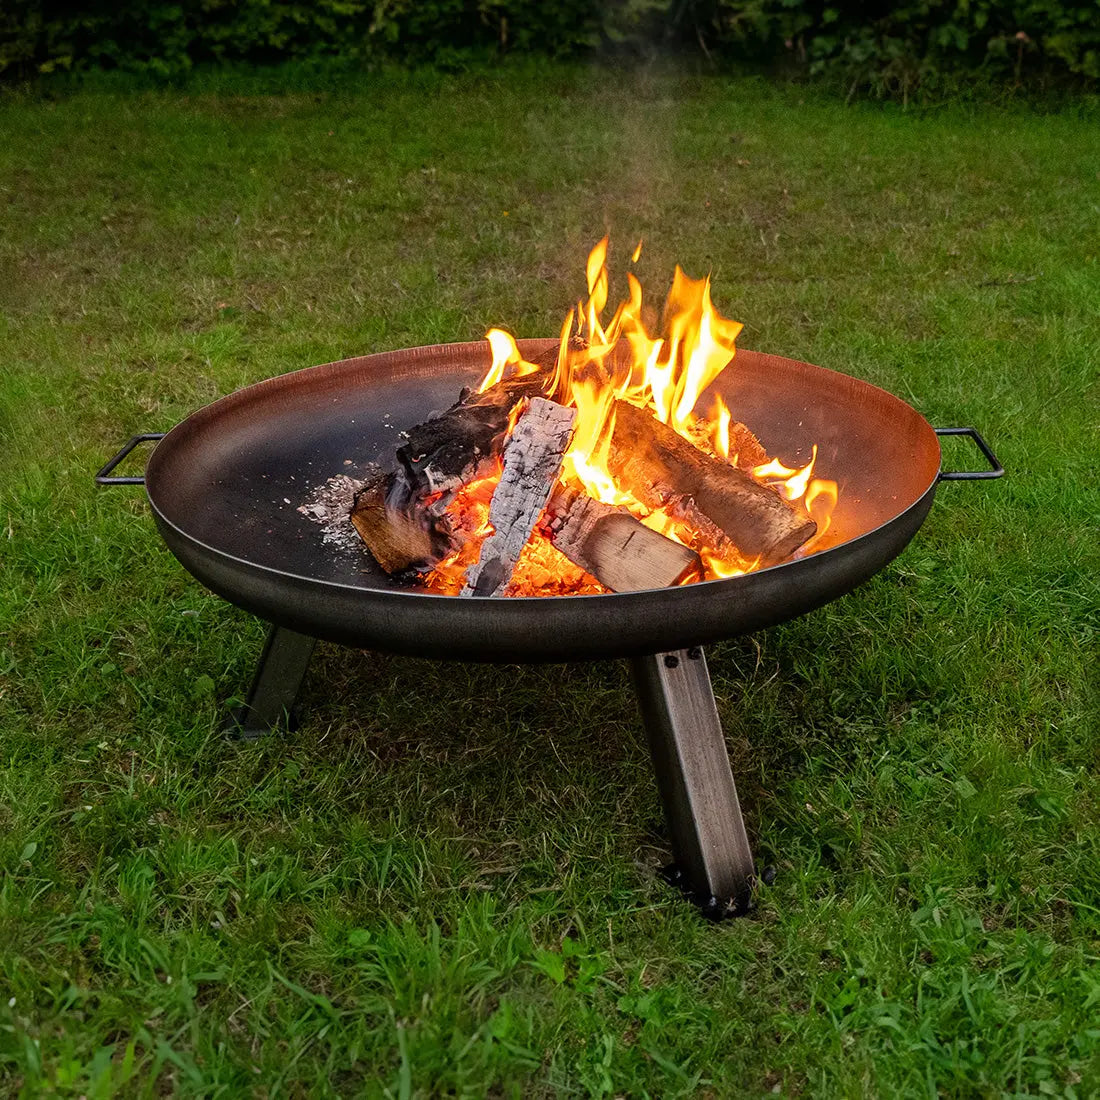 fire pit boutique camping glamping 